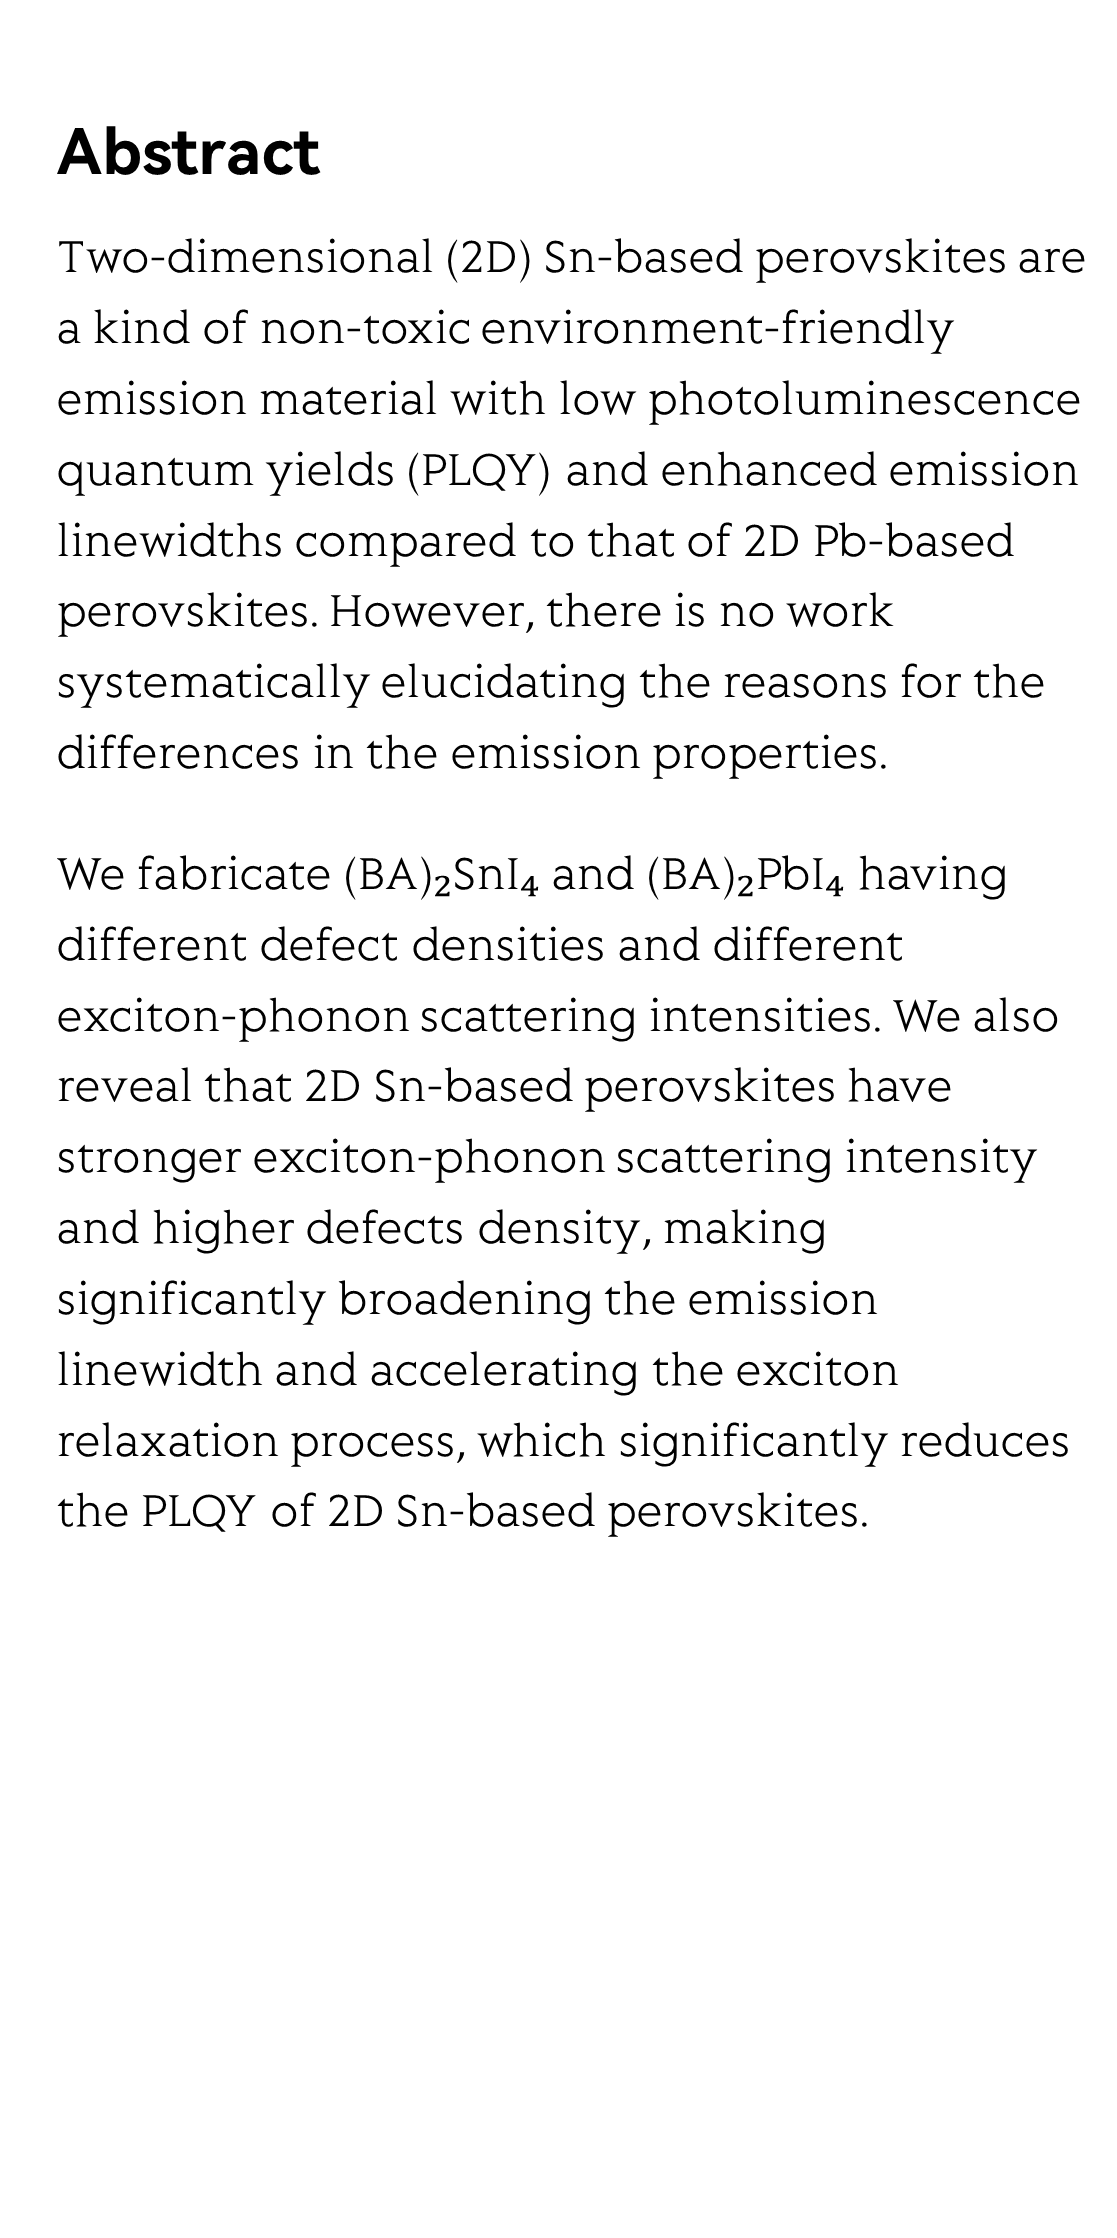 Effects on the emission discrepancy between two-dimensional Sn-based and Pb-based perovskites_2